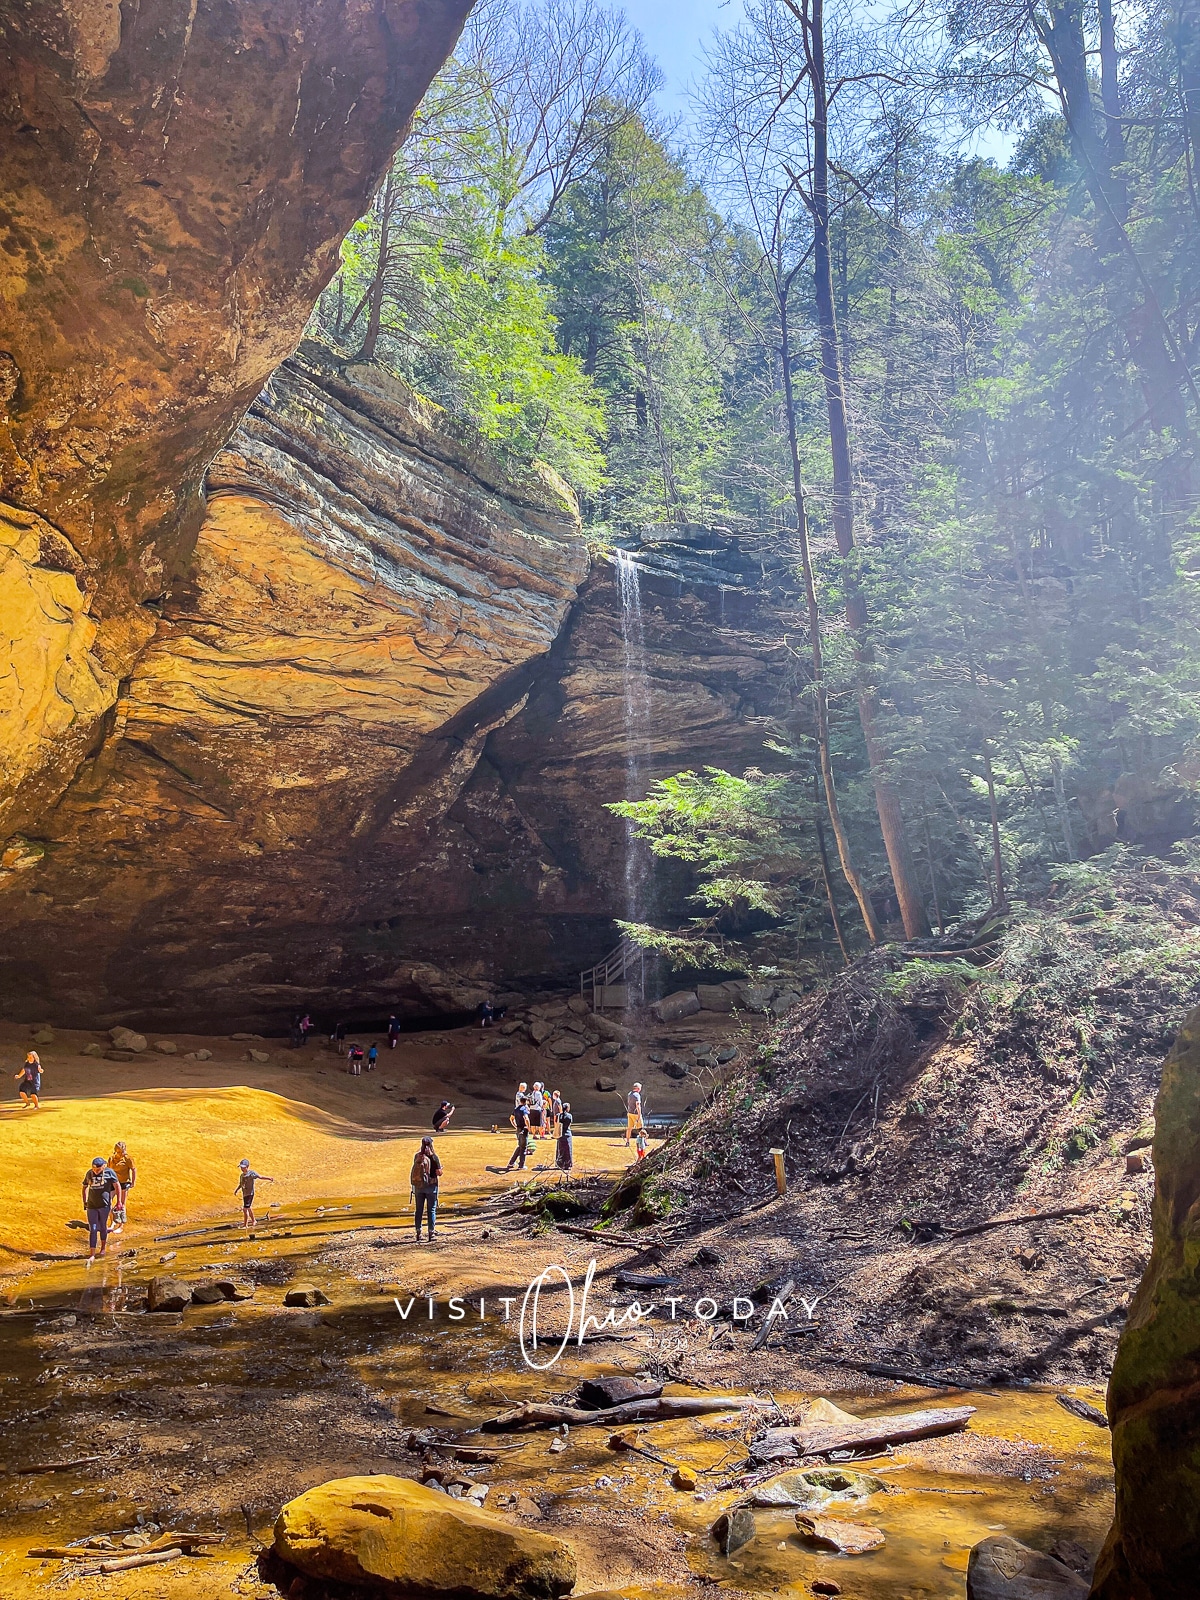 A photo of the waterfall in Ash Cave, Hocking Hills State Park. There are people at the bottom, admiring the view